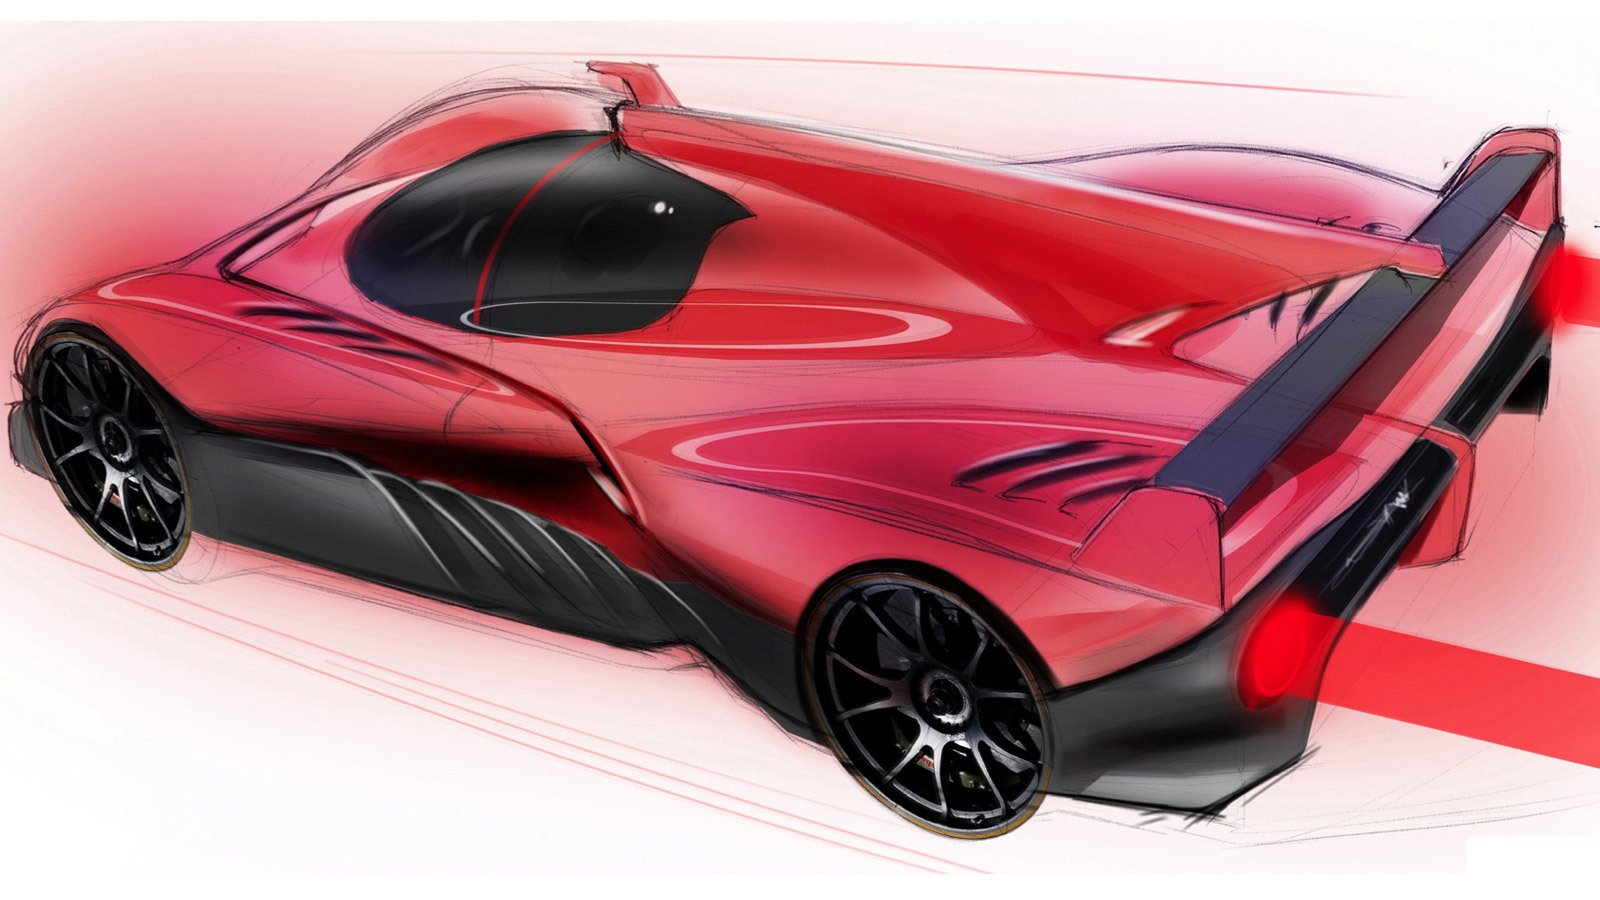 Official sketches of proposed James Glickenhaus P4/5 Competizione LMP race car